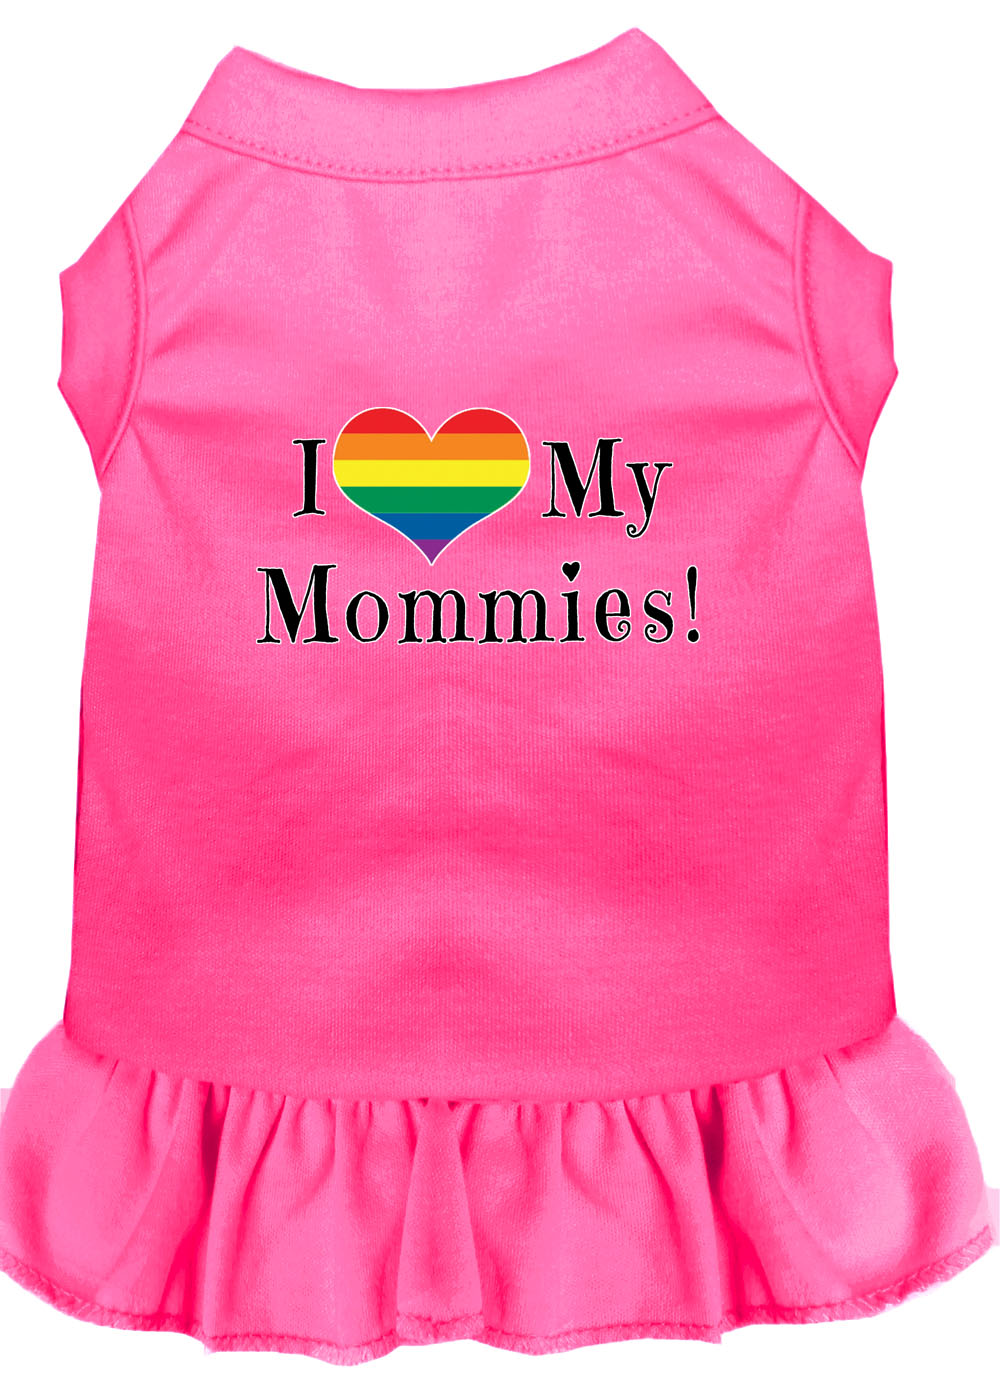 I Heart my Mommies Screen Print Dog Dress Bright Pink Med